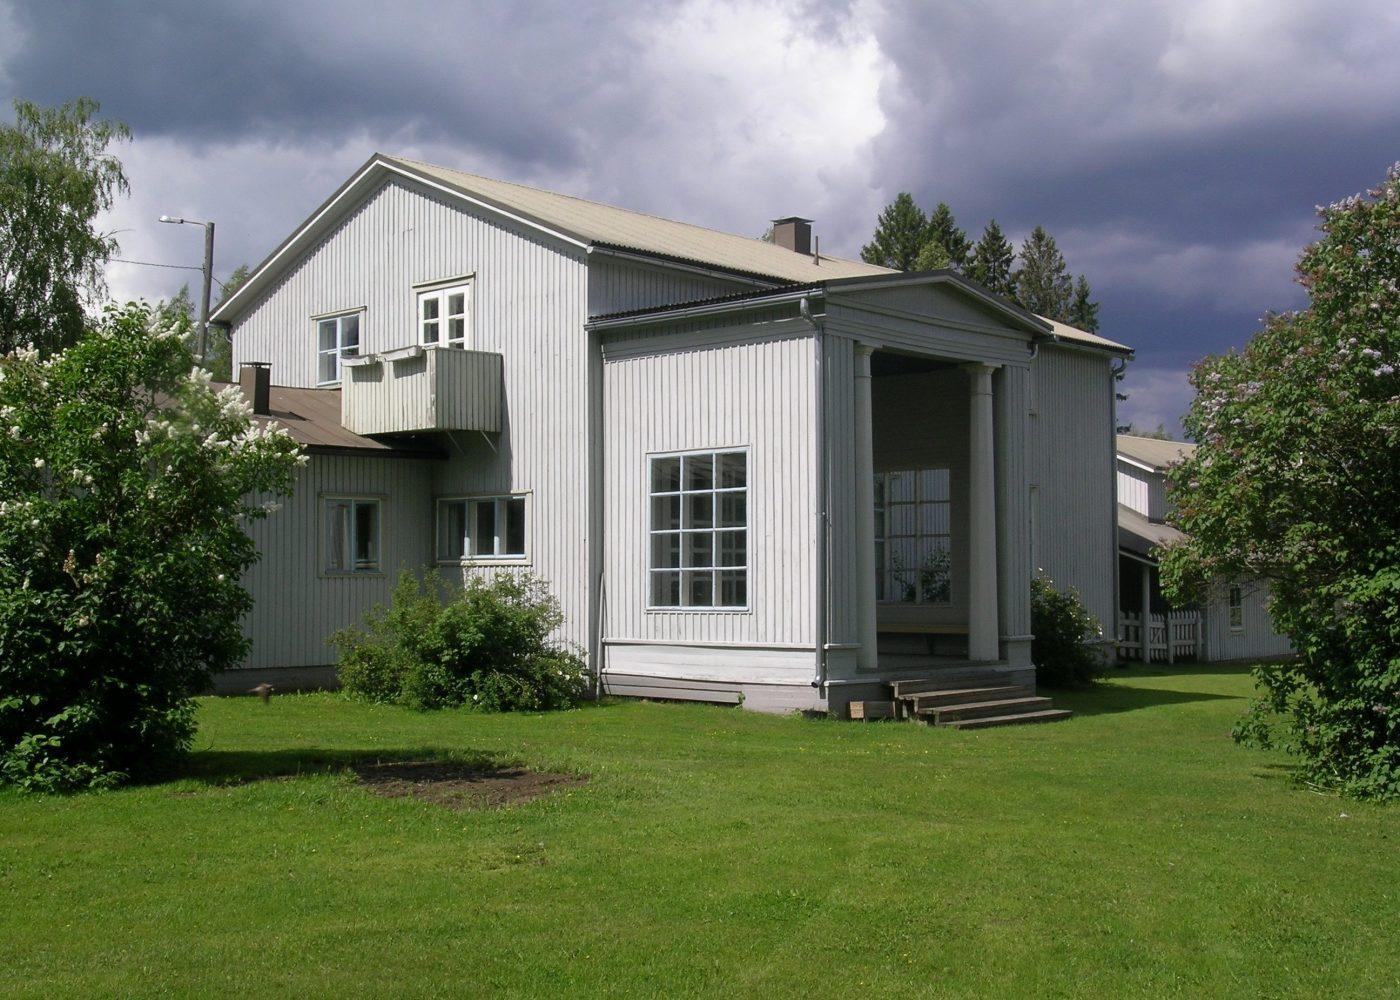 Alajärvi Villa Väinölä, the house for the brother, is restored and open for public